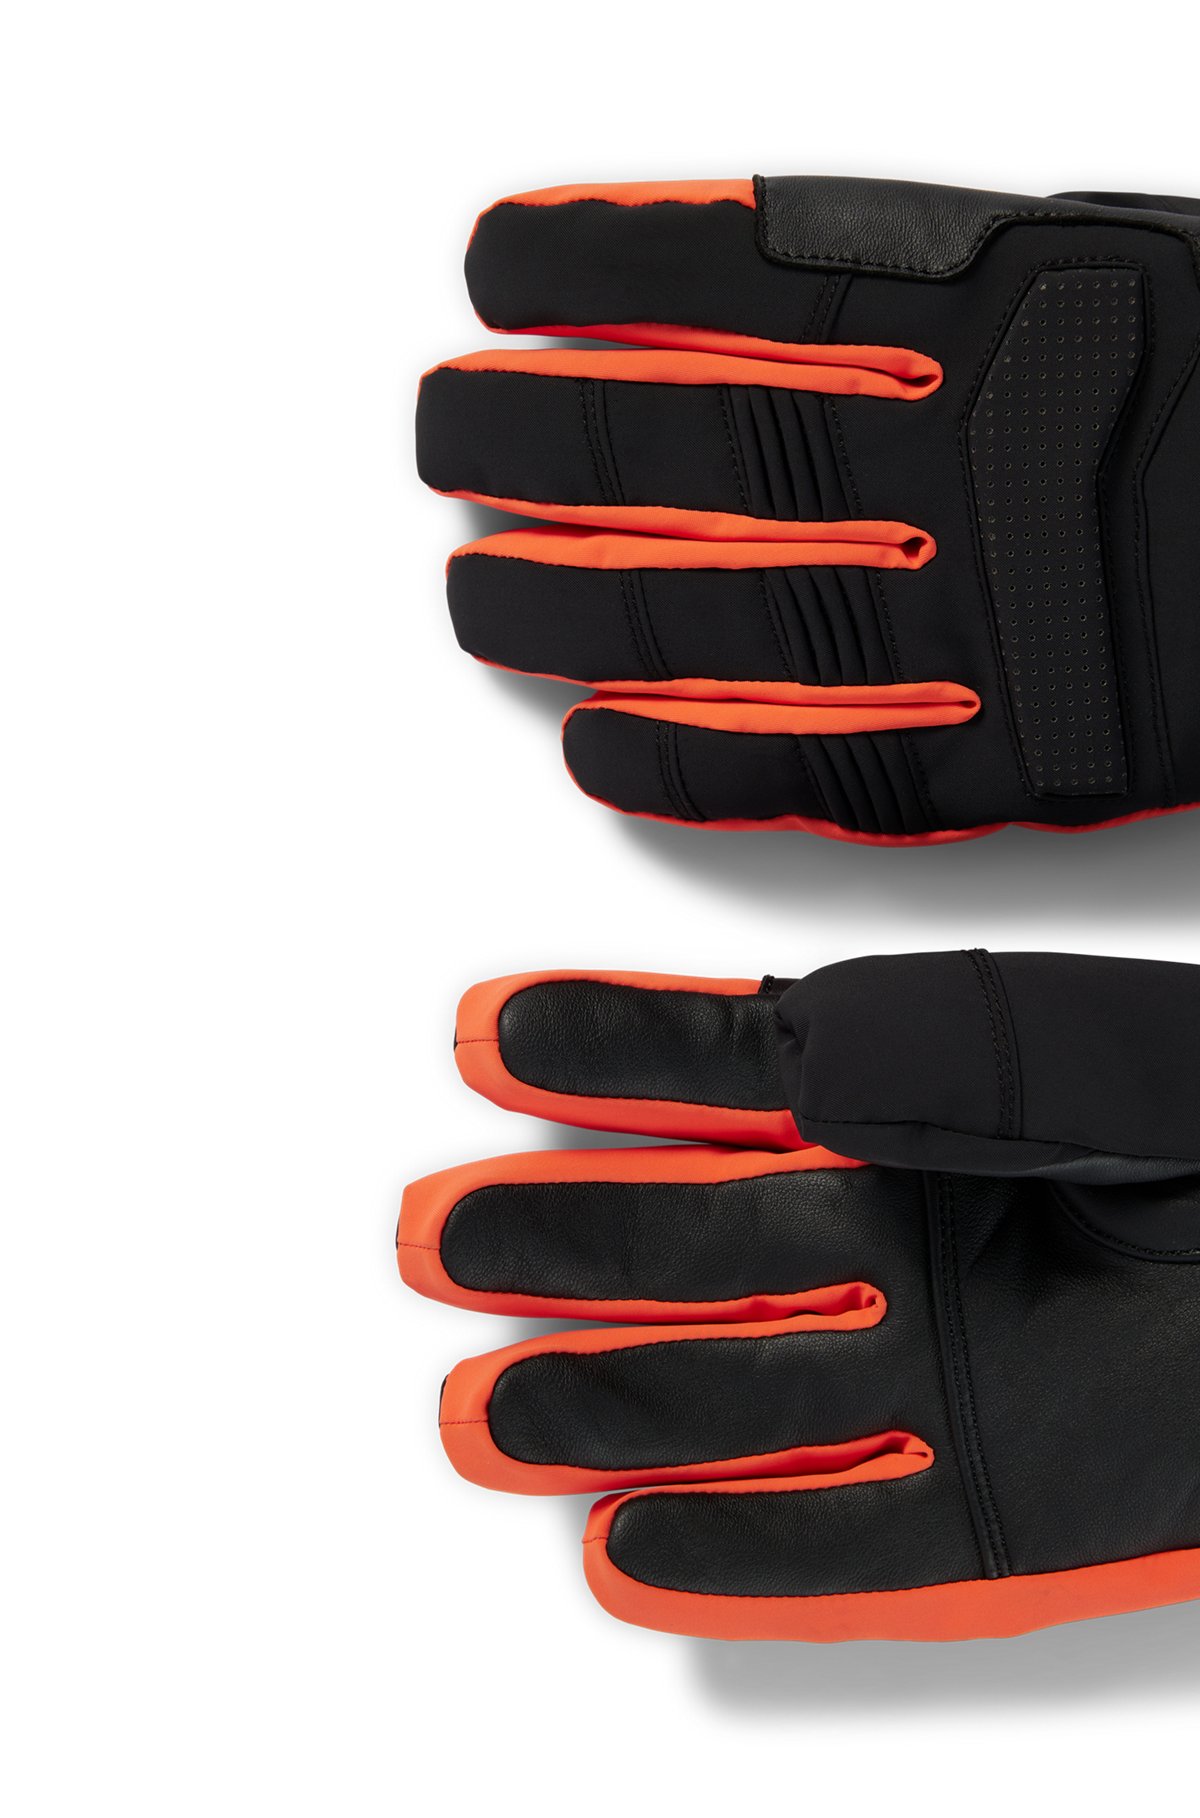 BOSS x Perfect Moment gloves with capsule branding, Black